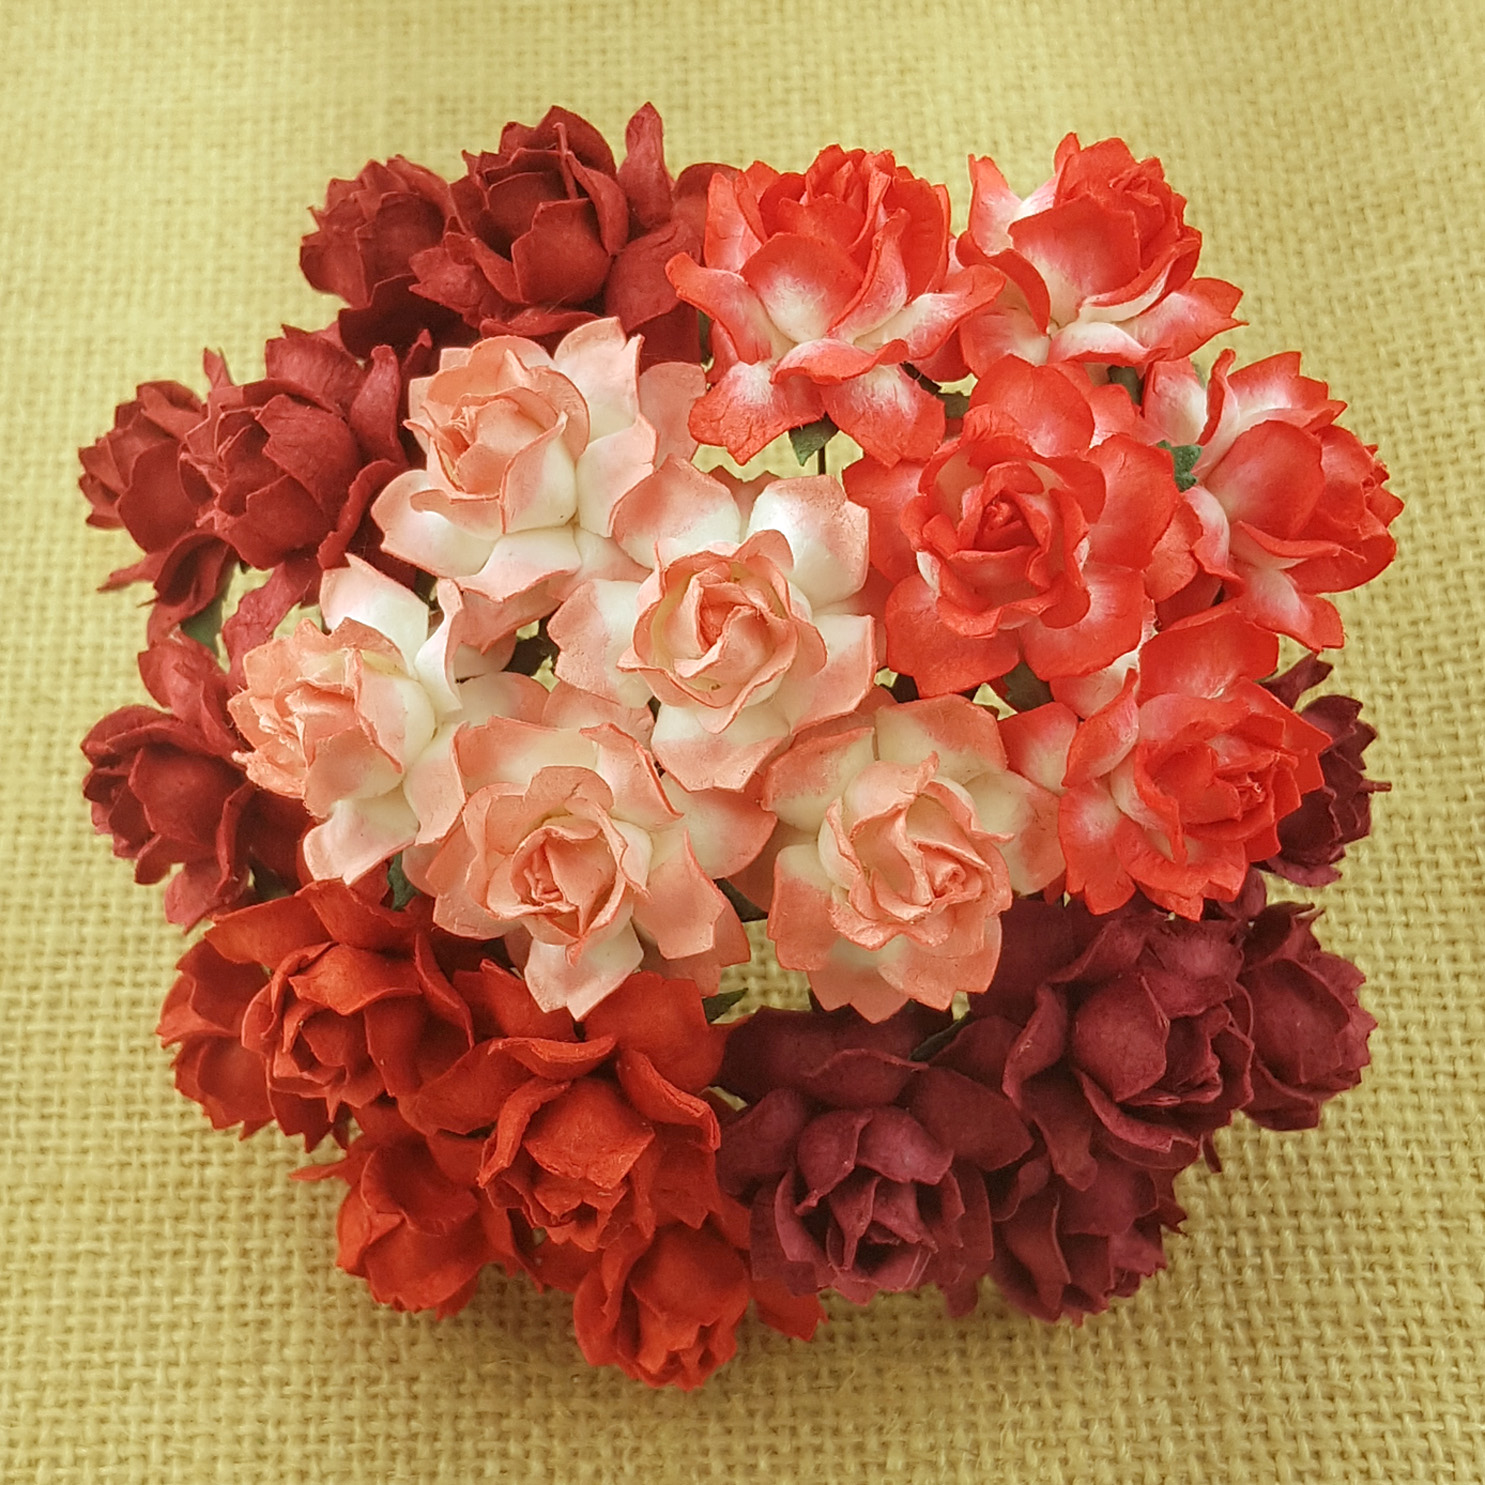 50 MIXED RED TONE MULBERRY PAPER COTTAGE ROSES - 5 COLOR